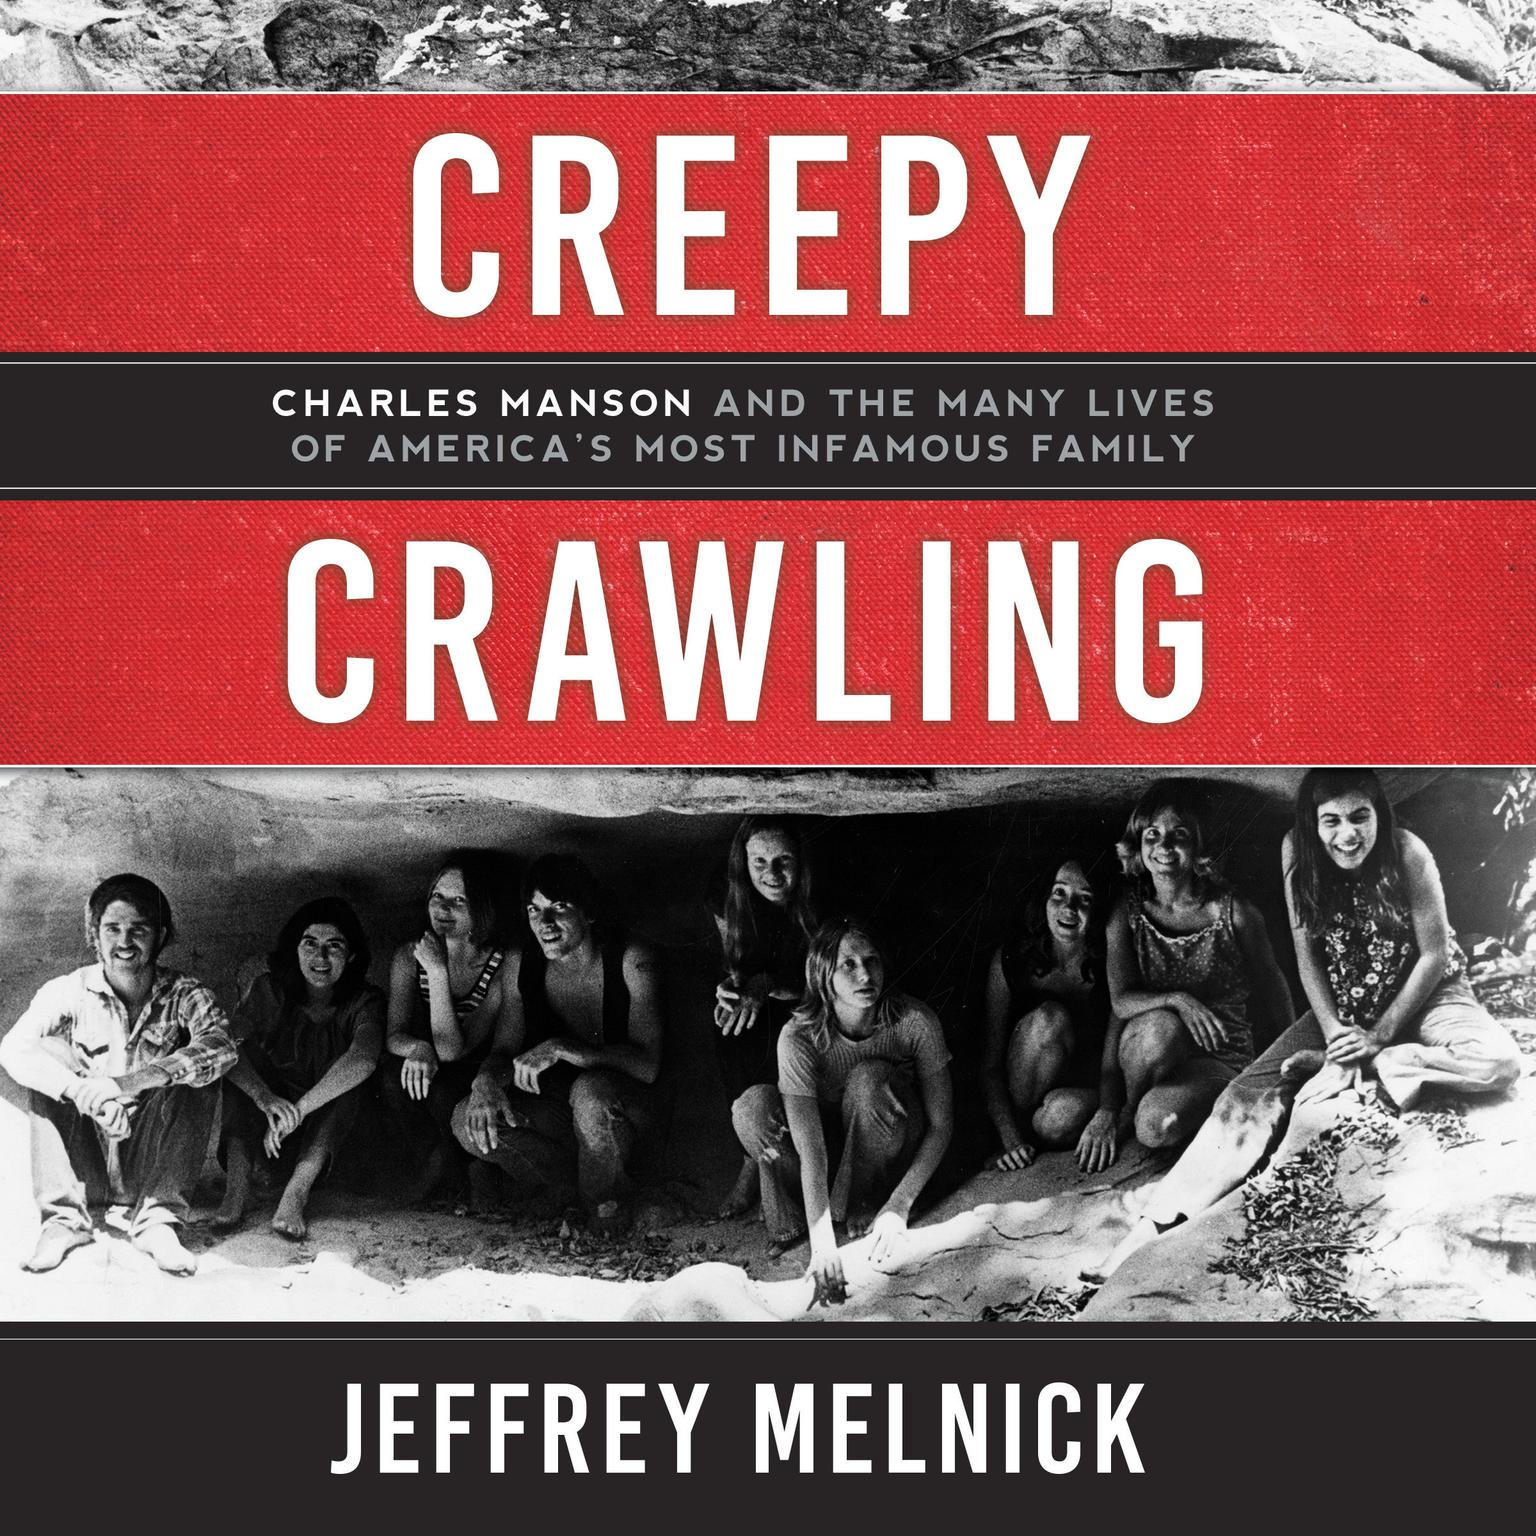 Creepy Crawling: Charles Manson and the Many Lives of Americas Most Infamous Family Audiobook, by Jeffrey Melnick